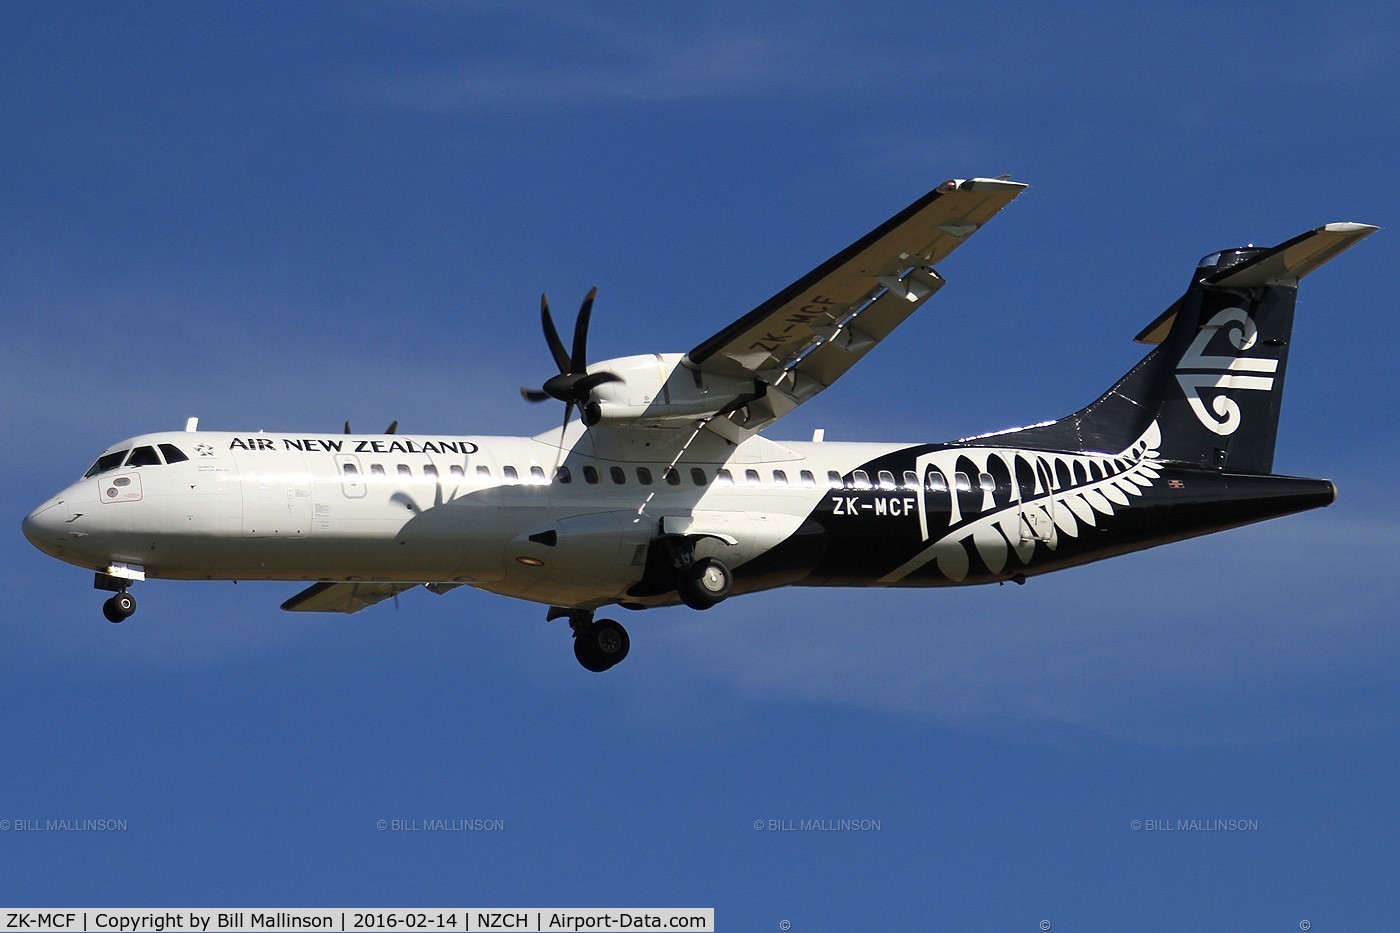 ZK-MCF, 1999 ATR 72-212A C/N 600, FINALS TO 02 AS NZ5469 FROM NPE